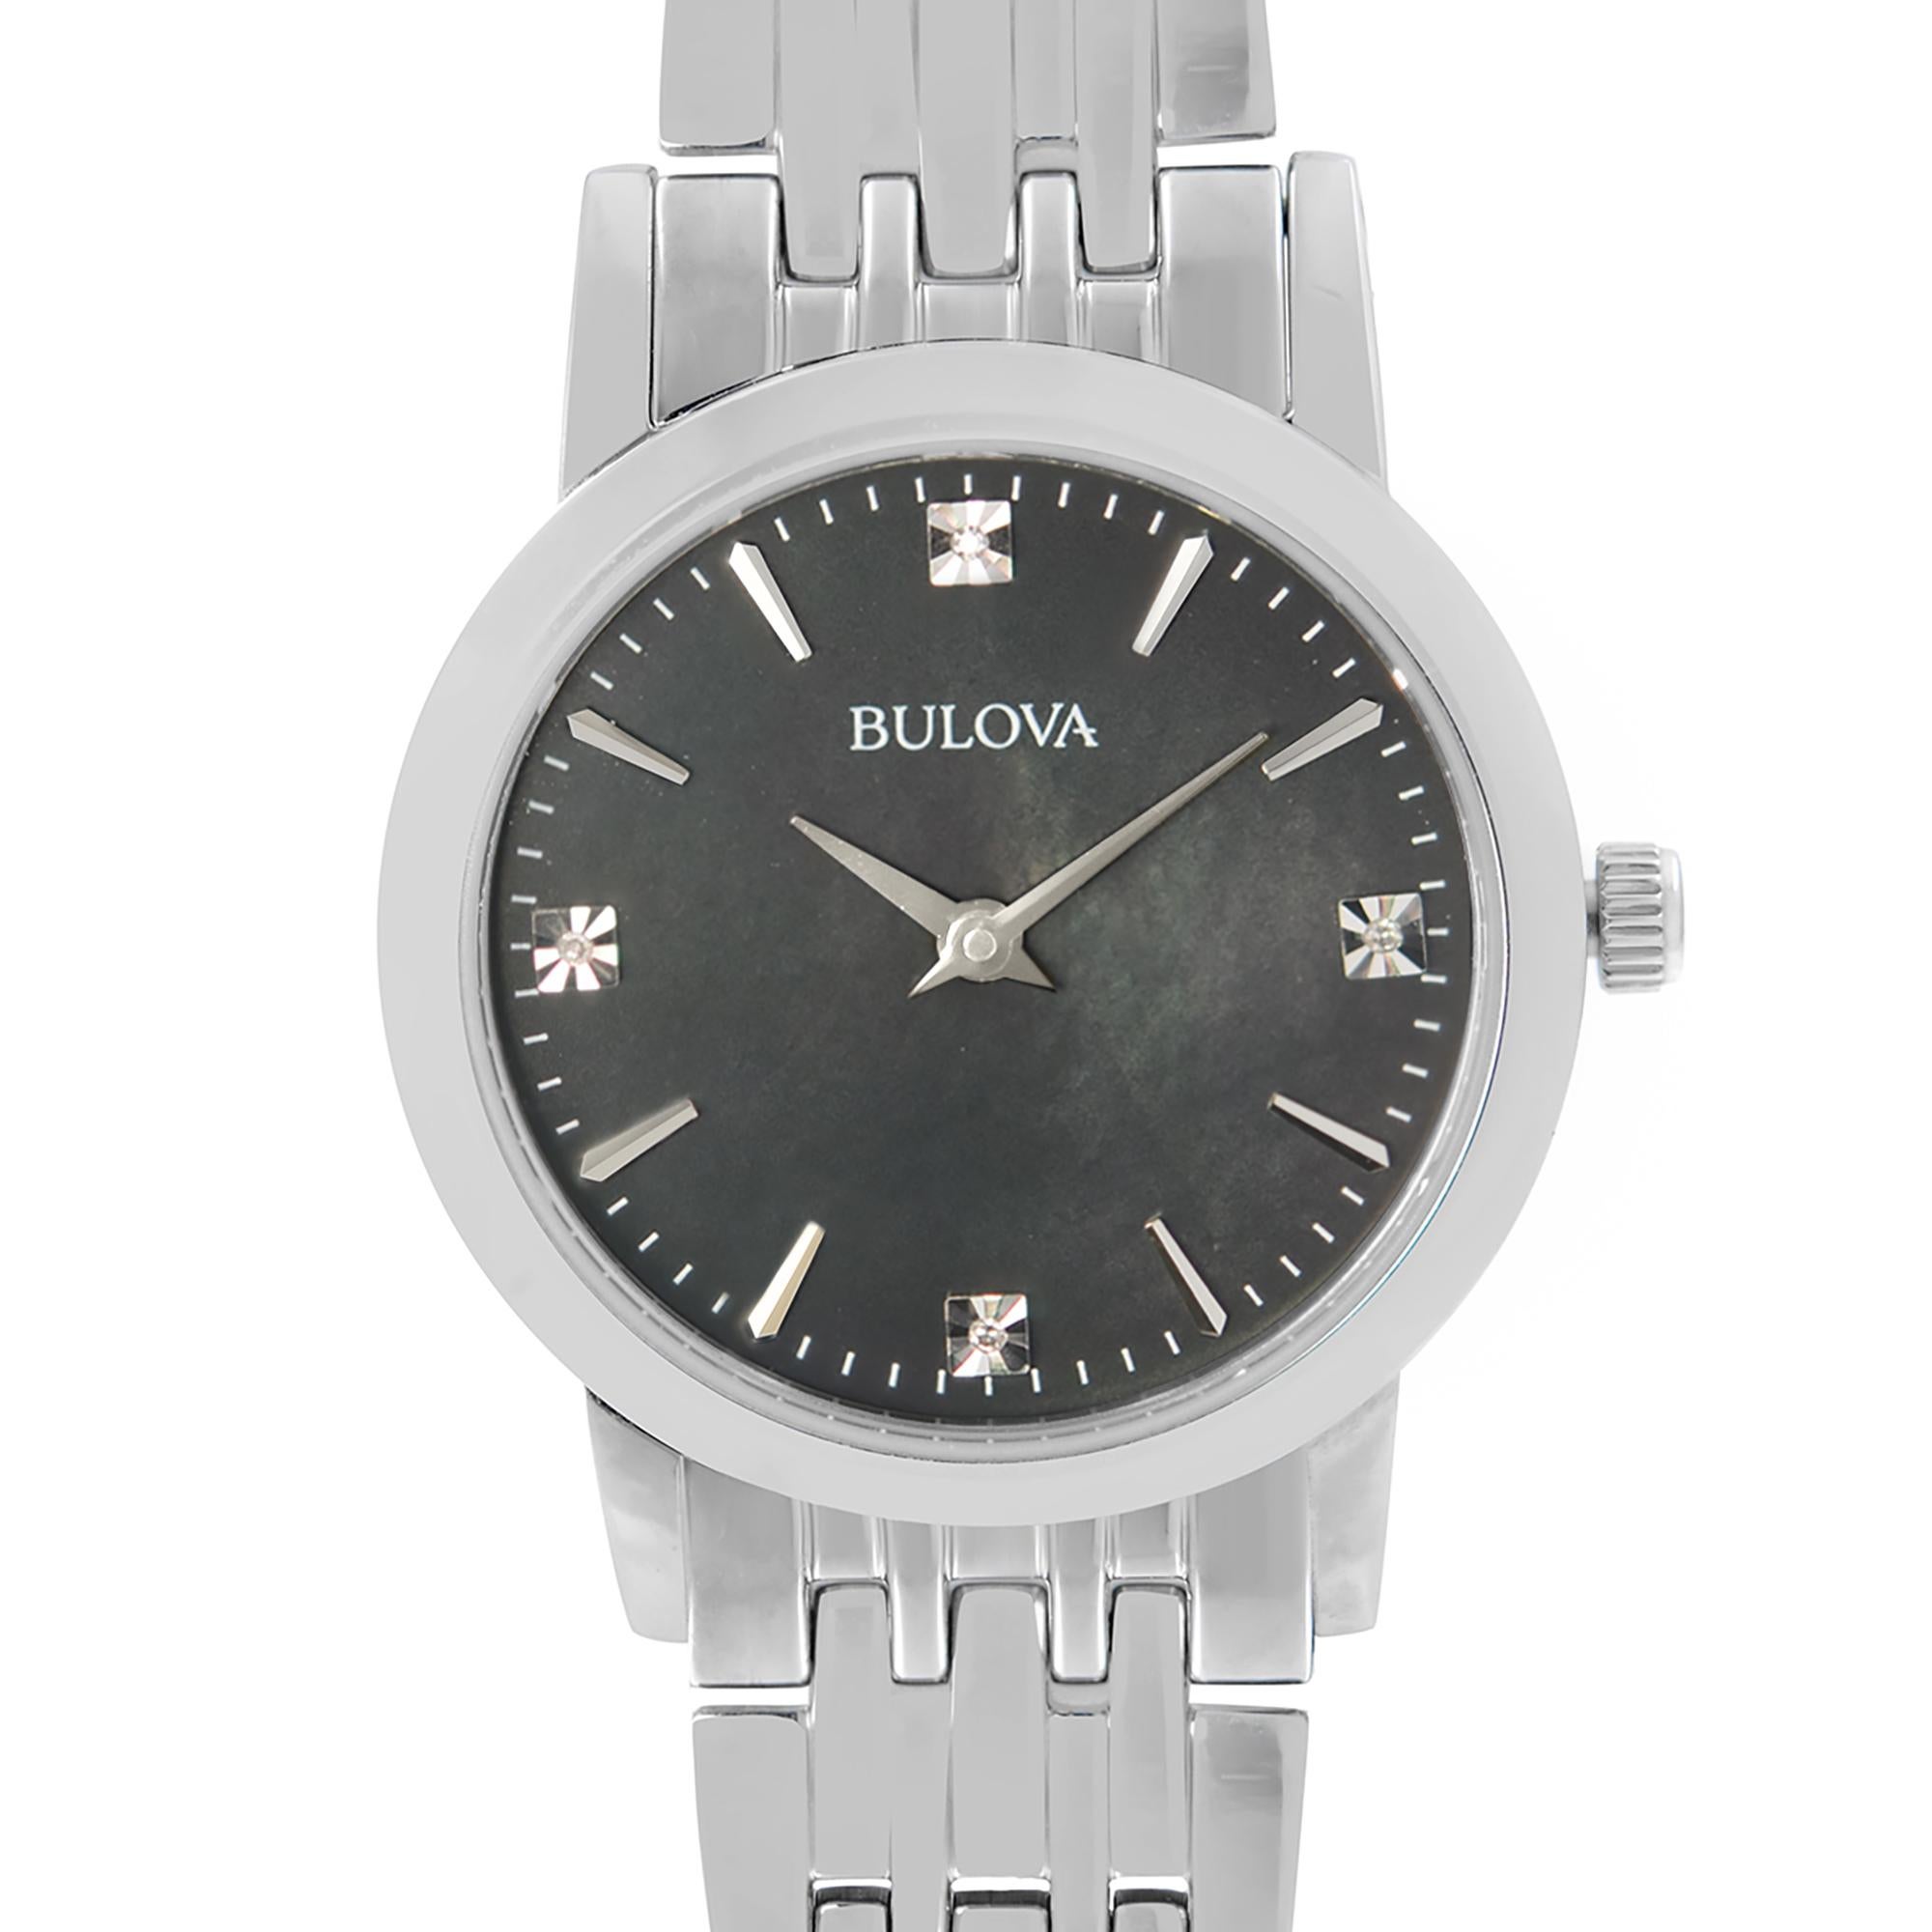 Display Model Bulova Classic Stainless Steel Diamond Black MOP Dial Quartz Ladies Watch 96P148. The Watch has minor Scratches on the case back Due to store handling. Stainless Steel Case with a Stainless Steel Bracelet. Fixed Stainless Steel Bezel.